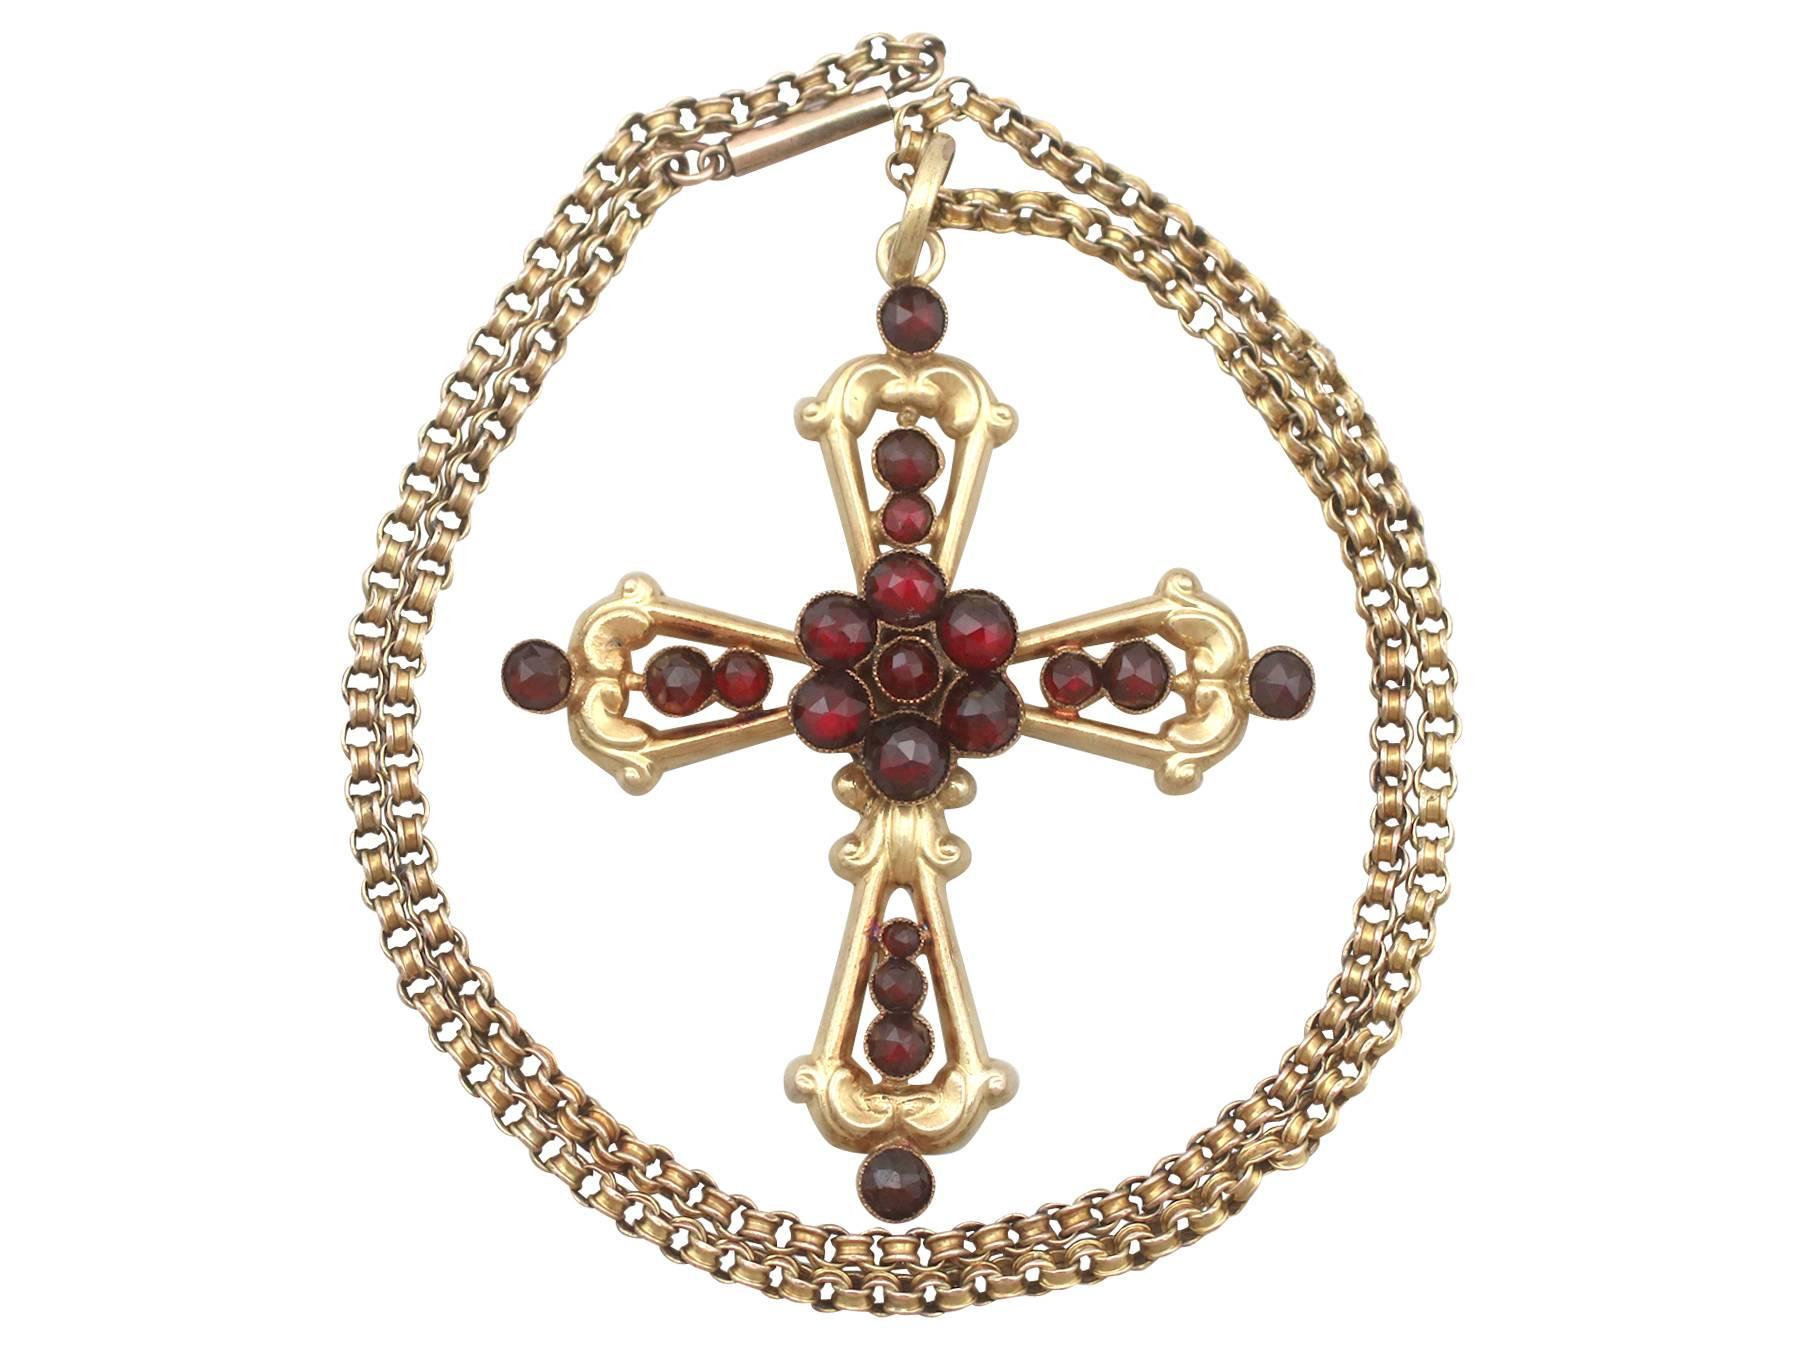 An impressive antique Victorian 5.56 carat garnet and 15 karat yellow gold cross pendant with a 9 karat yellow gold chain; part of our diverse antique jewelry and estate jewelry collections

This fine and impressive Victorian cross pendant has been